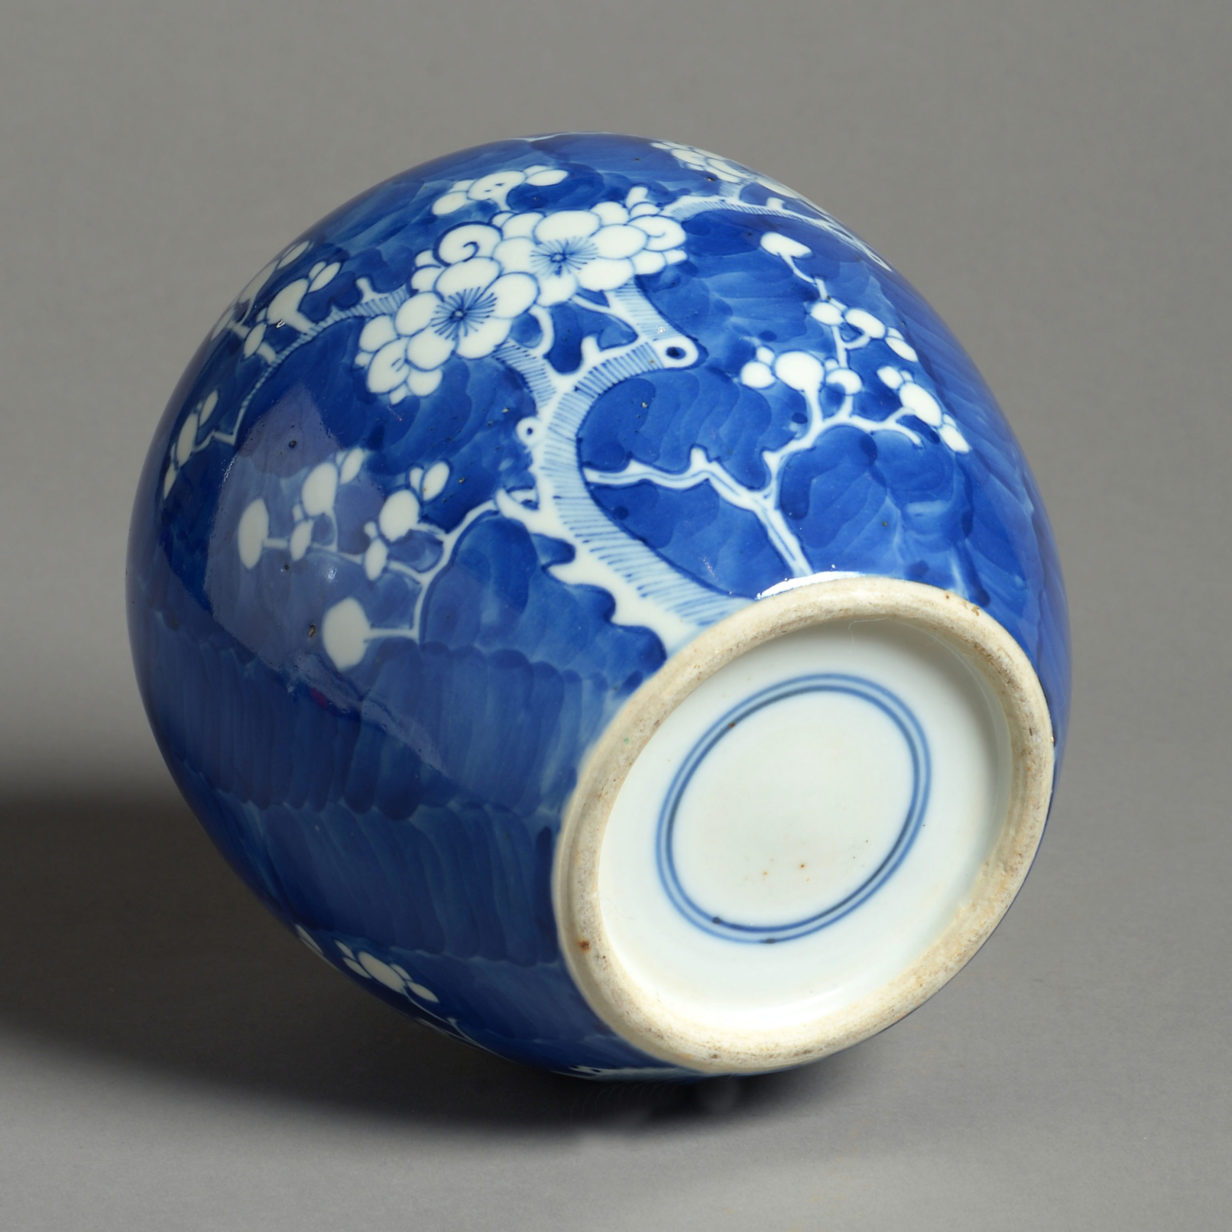 A 19th century blue and white porcelain jar